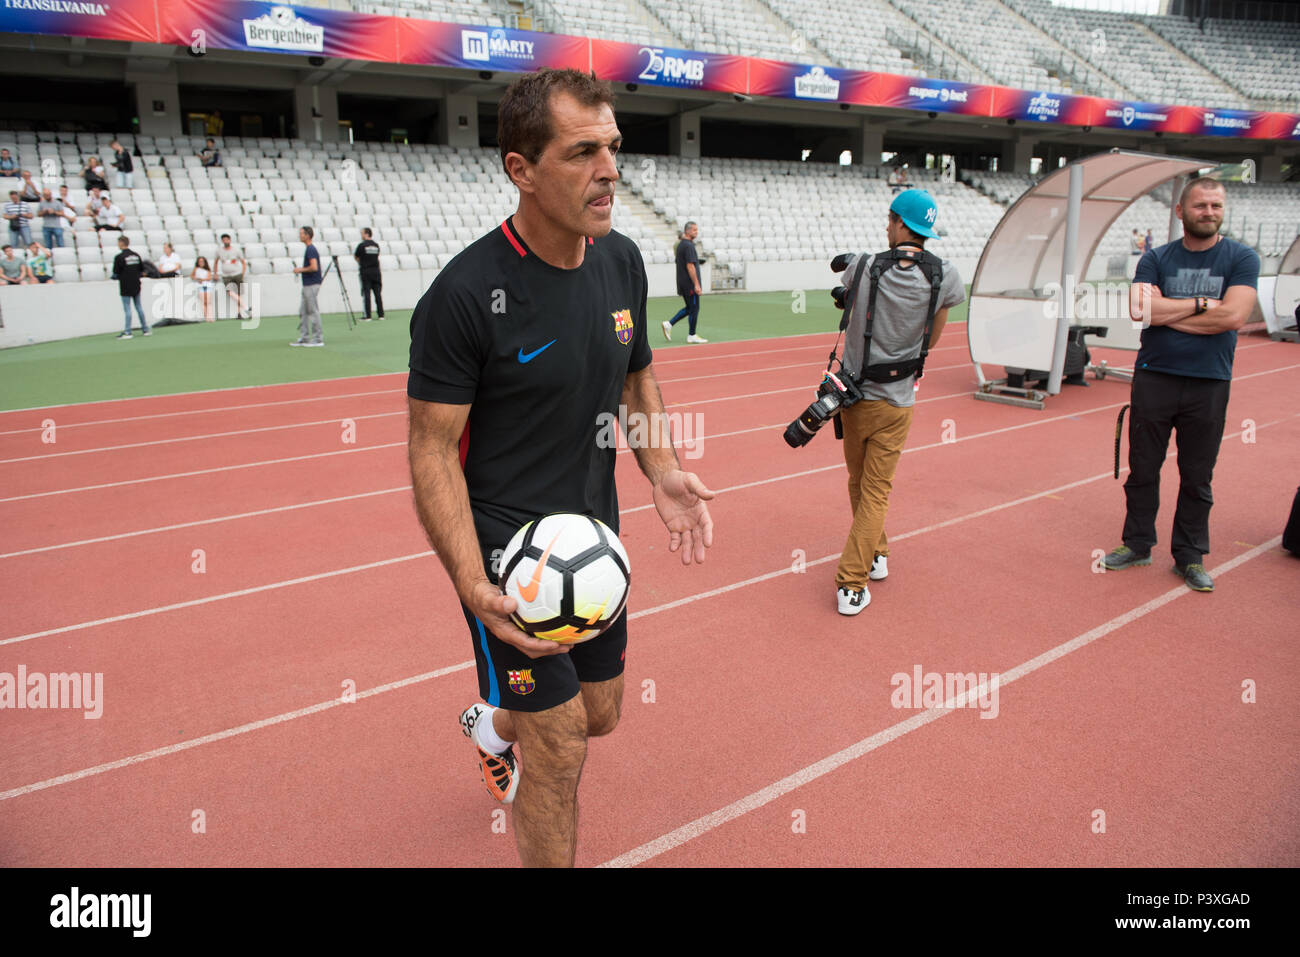 CLUJ NAPOCA, ROMANIA - JUNE 15, 2018: Football player of Barcelona Legends, Miguel Angel Nadal entering the field before a friendly match against Roma Stock Photo